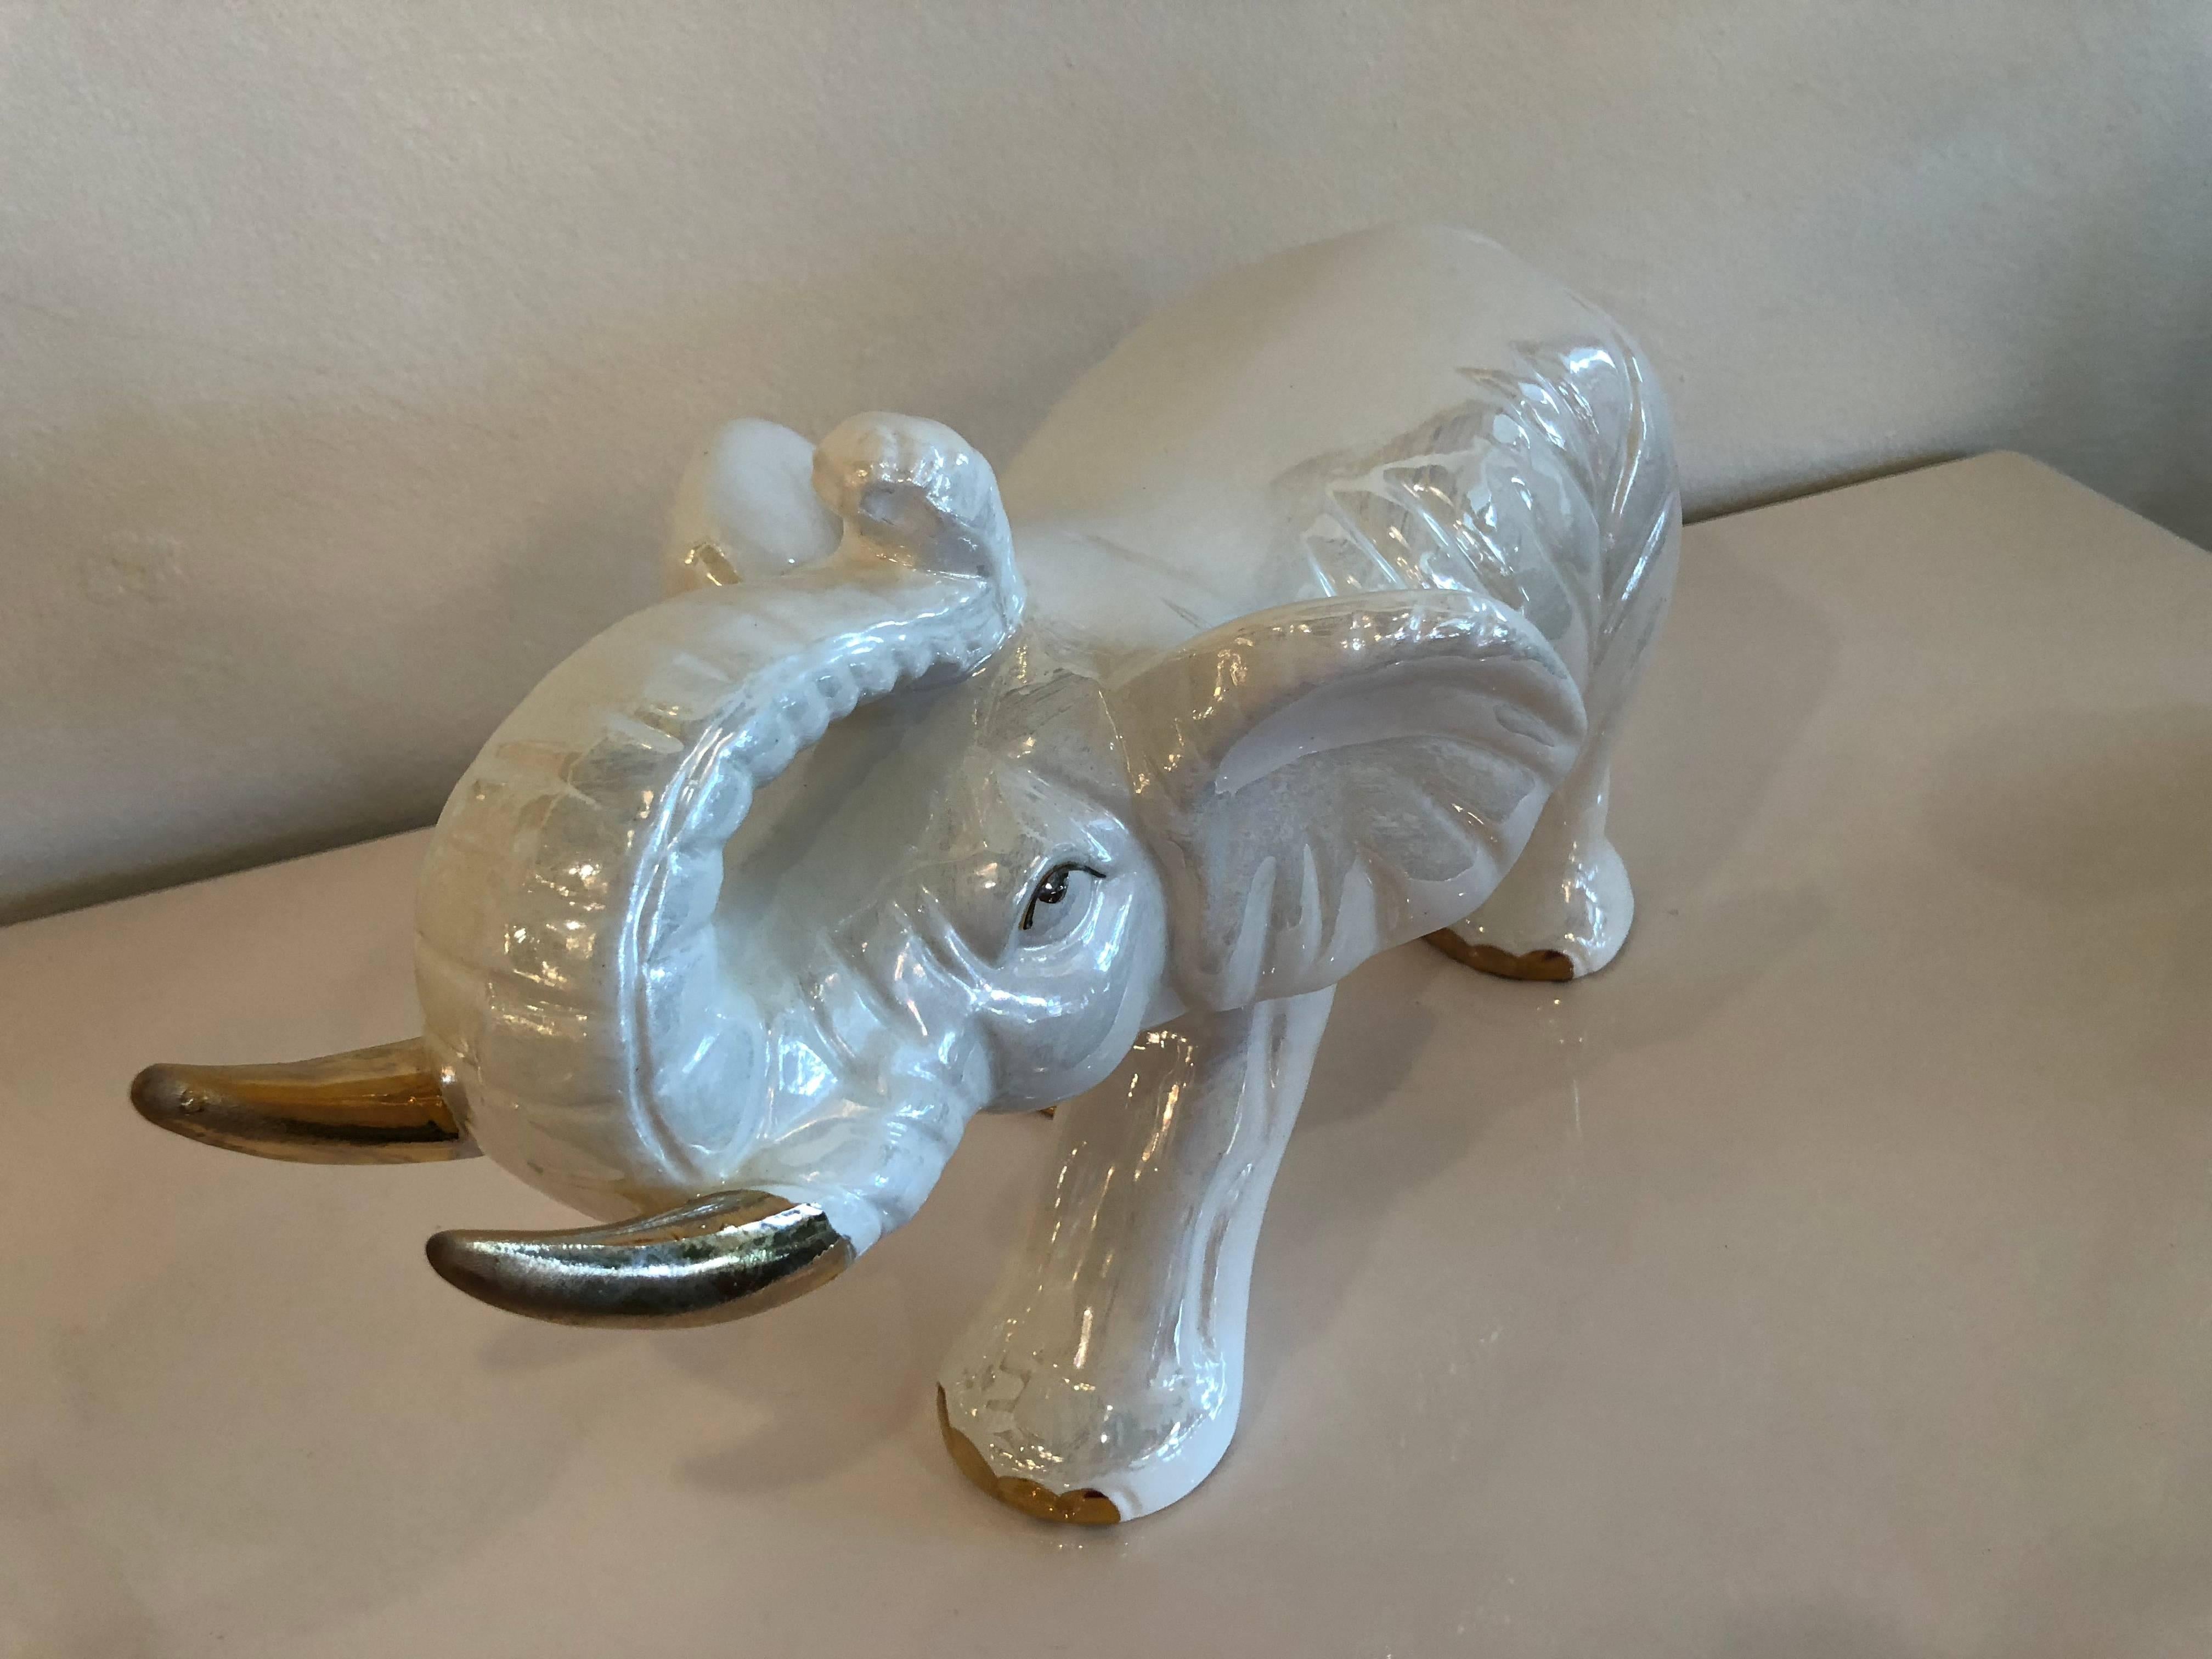 Vintage ceramic white elephant with gold tusks. No chips or breaks.